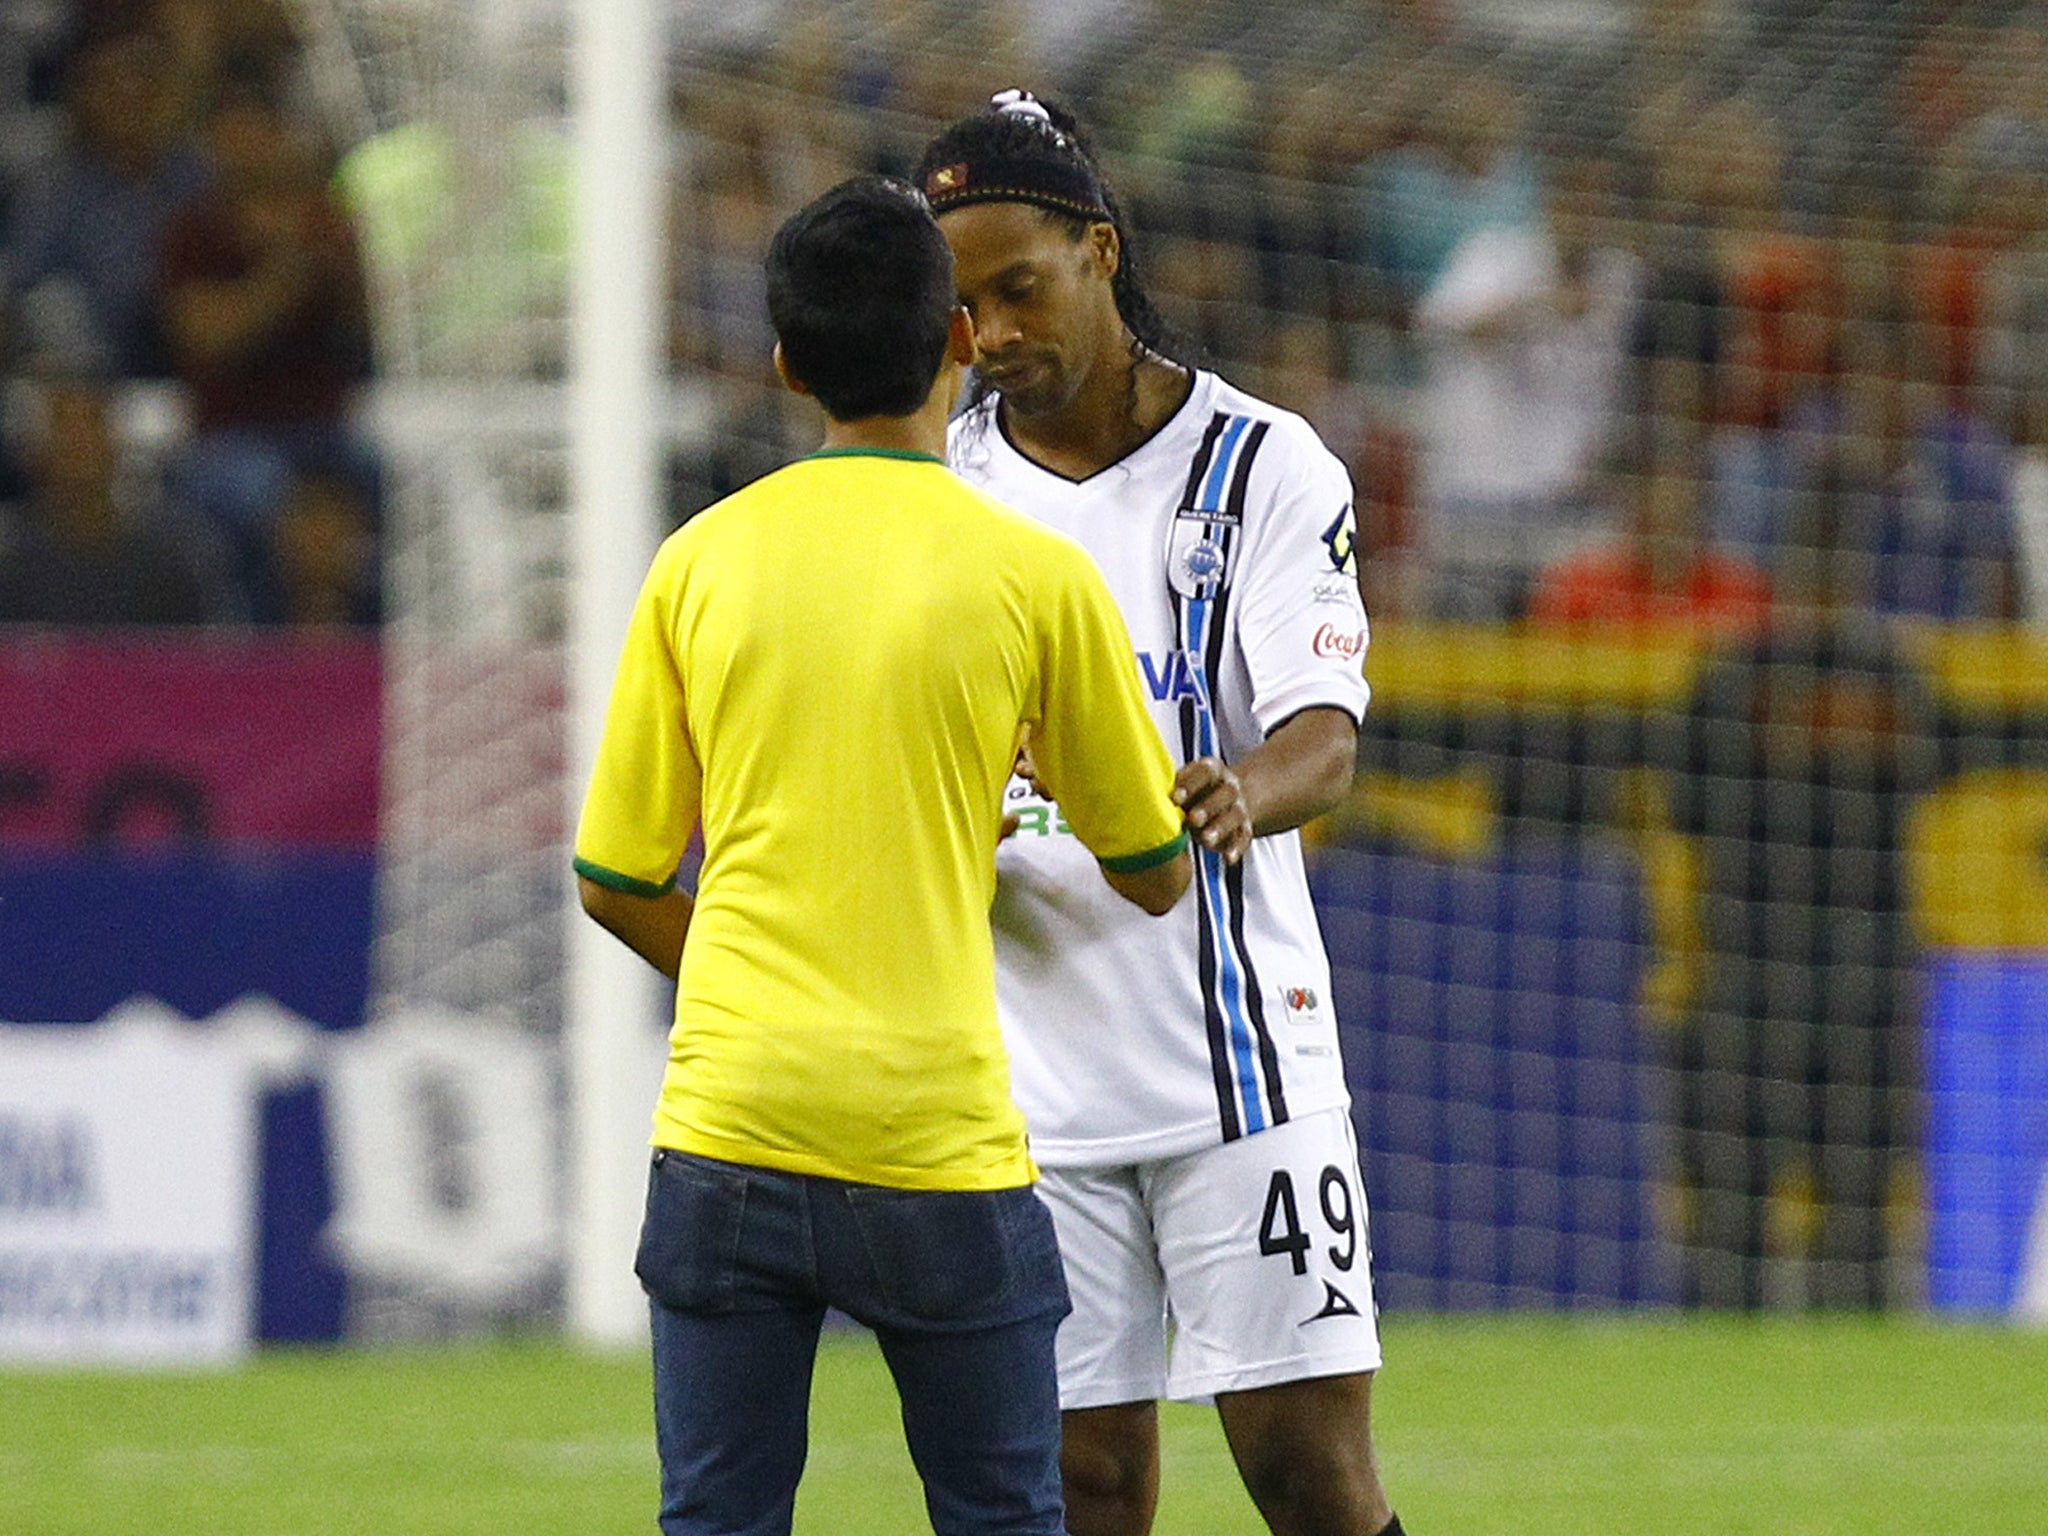 Ronaldinho signs the t-shirt of a pitch invader